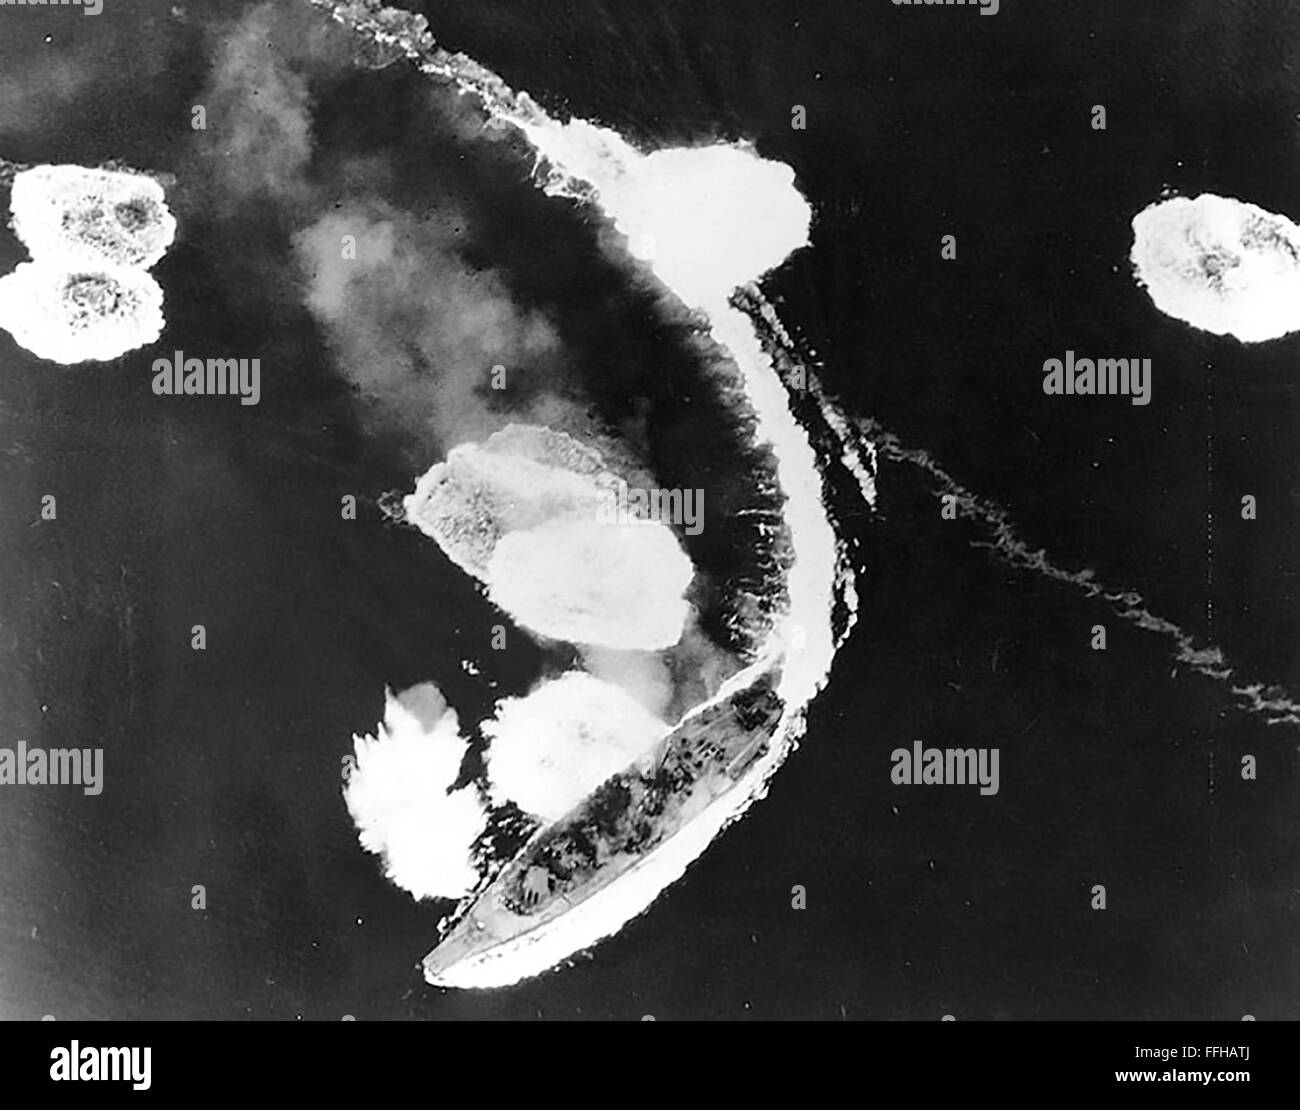 JAPANESE BATTLESHIP YAMATO under attack by the US Navy Task Force in the Seto Inland Sea  off the Japanese port of Kure in south west Japan on 19 March 1945. The ship was only lightly damaged but finally sunk on 7 April. Stock Photo